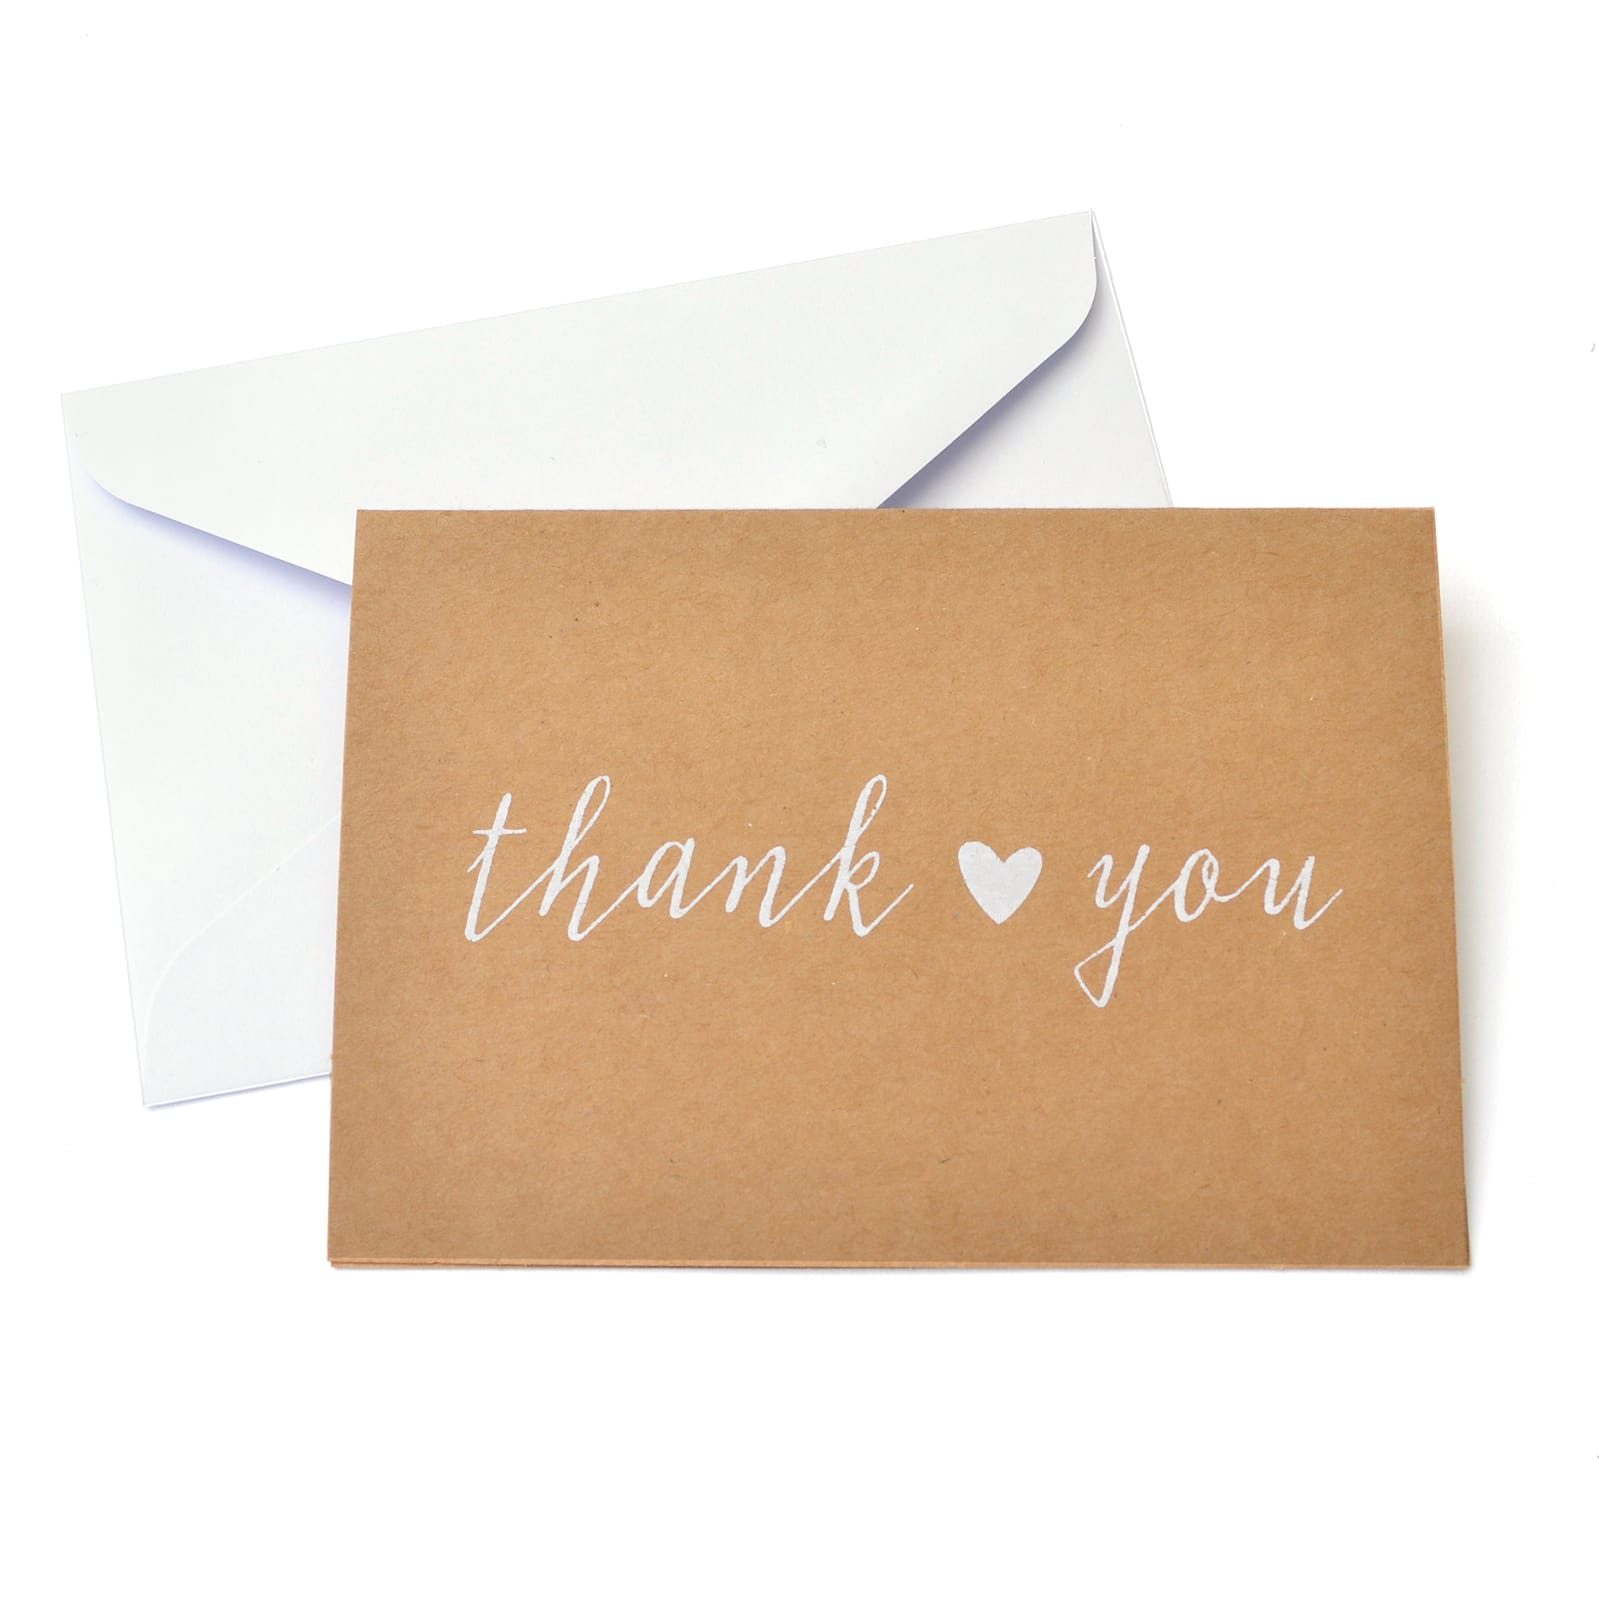 buy-the-kraft-thank-you-cards-envelopes-by-celebrate-it-at-michaels